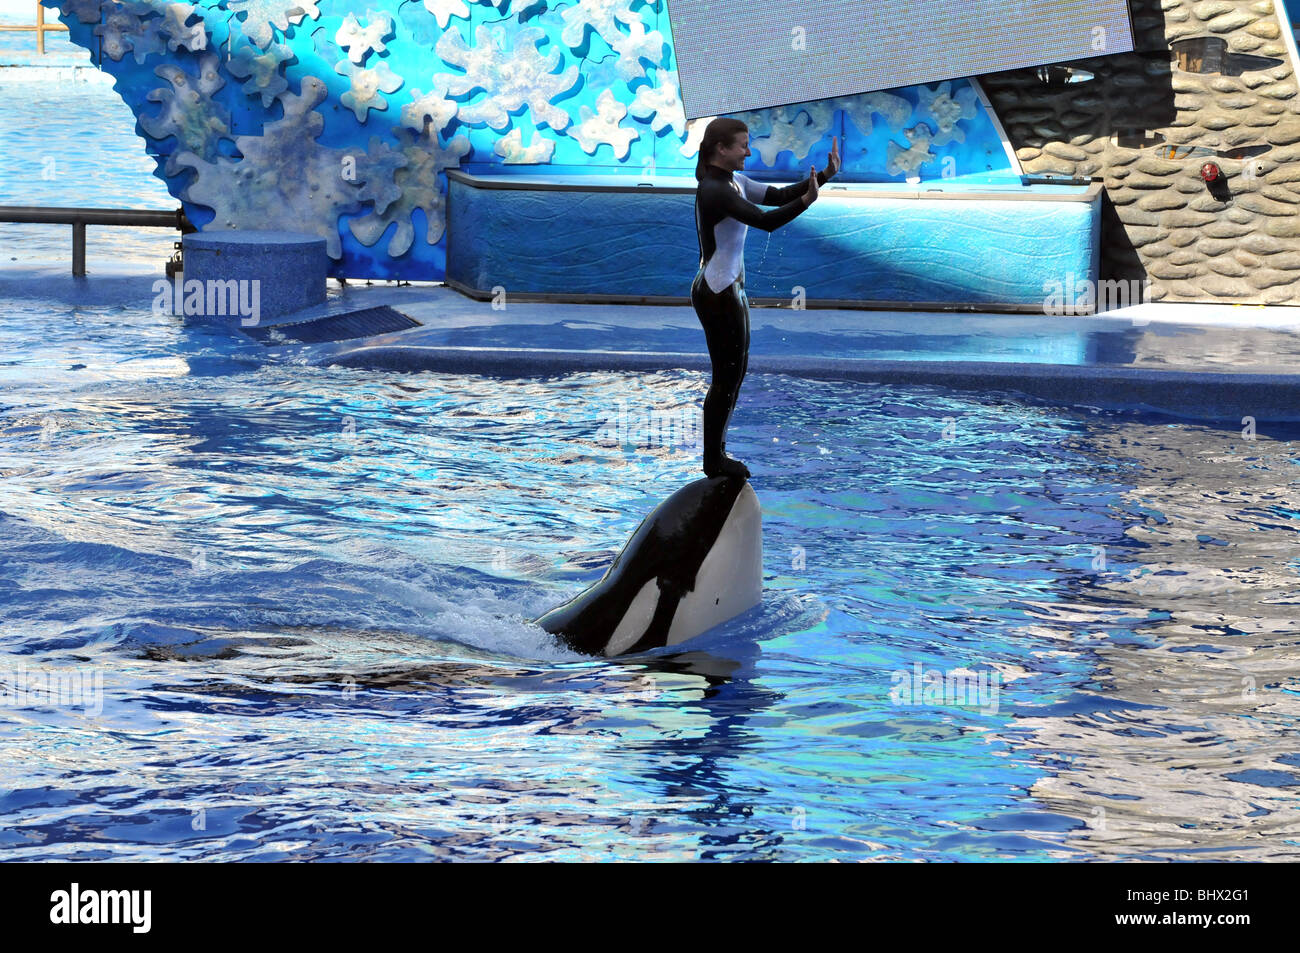 SEA WORLD - APRIL 16: Trainer performing in water tank with killer whale, Orlando FL, on April 16, 2008 Stock Photo